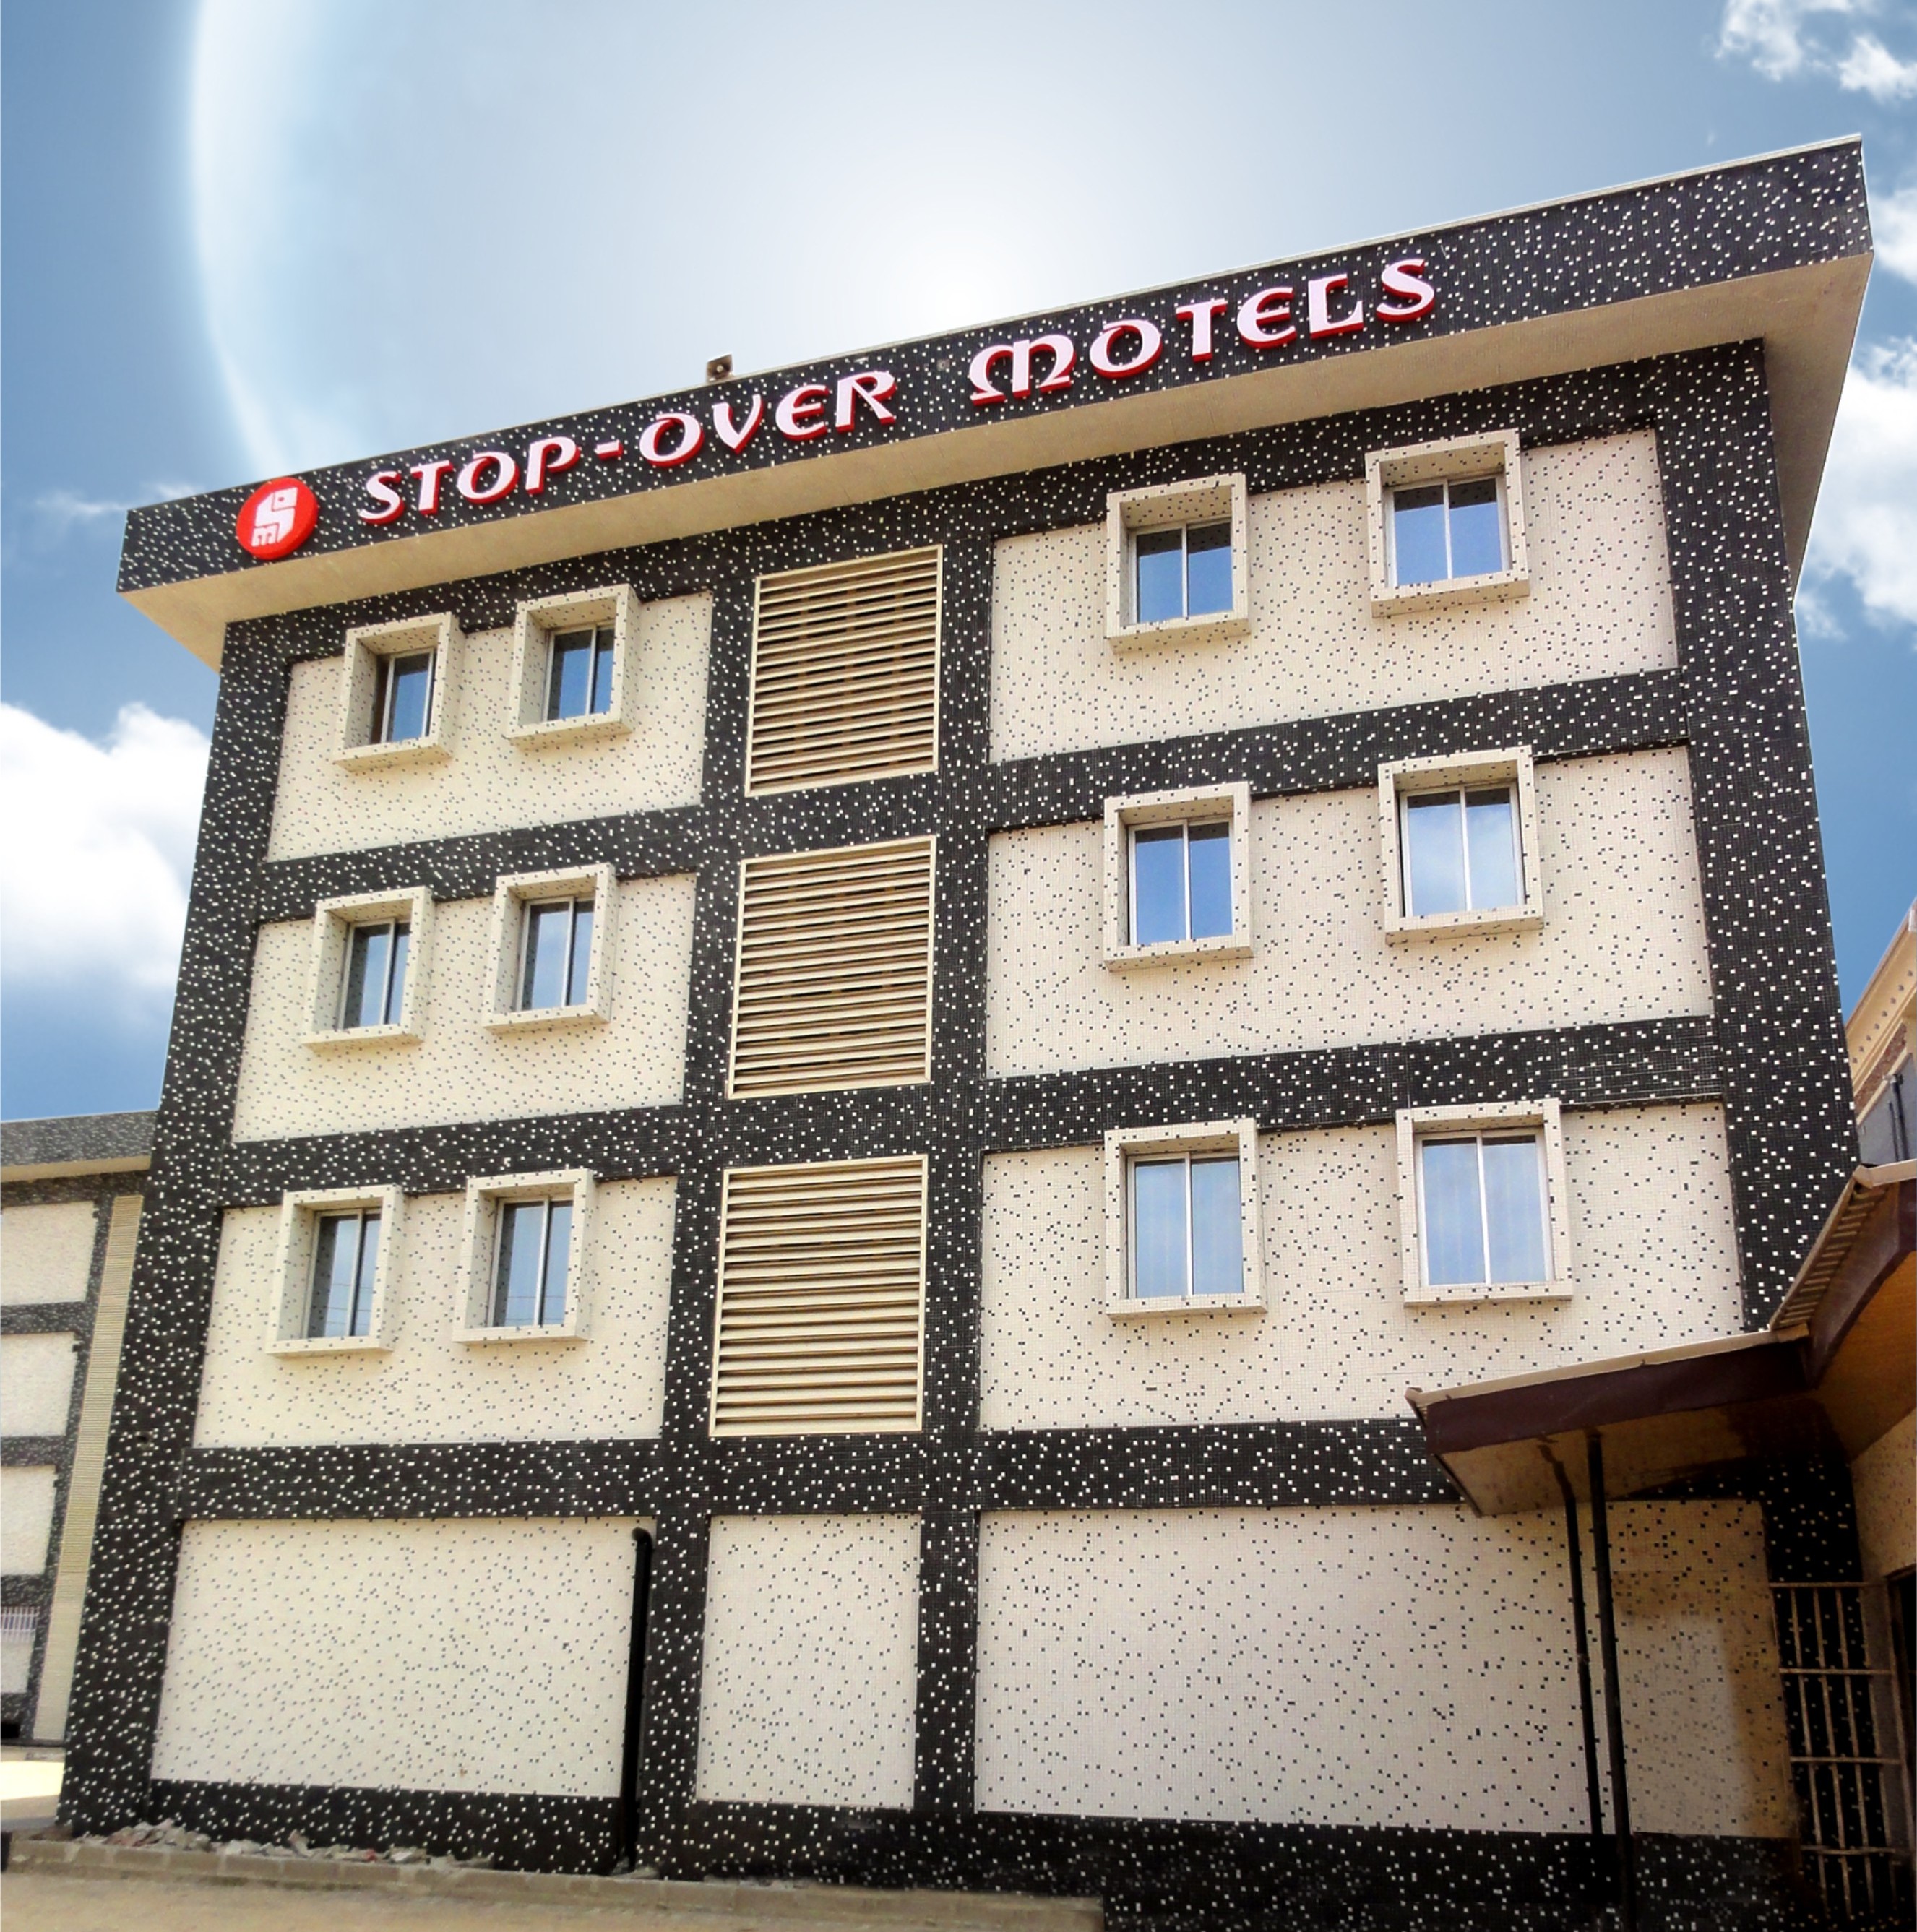 Stop Over Motels image